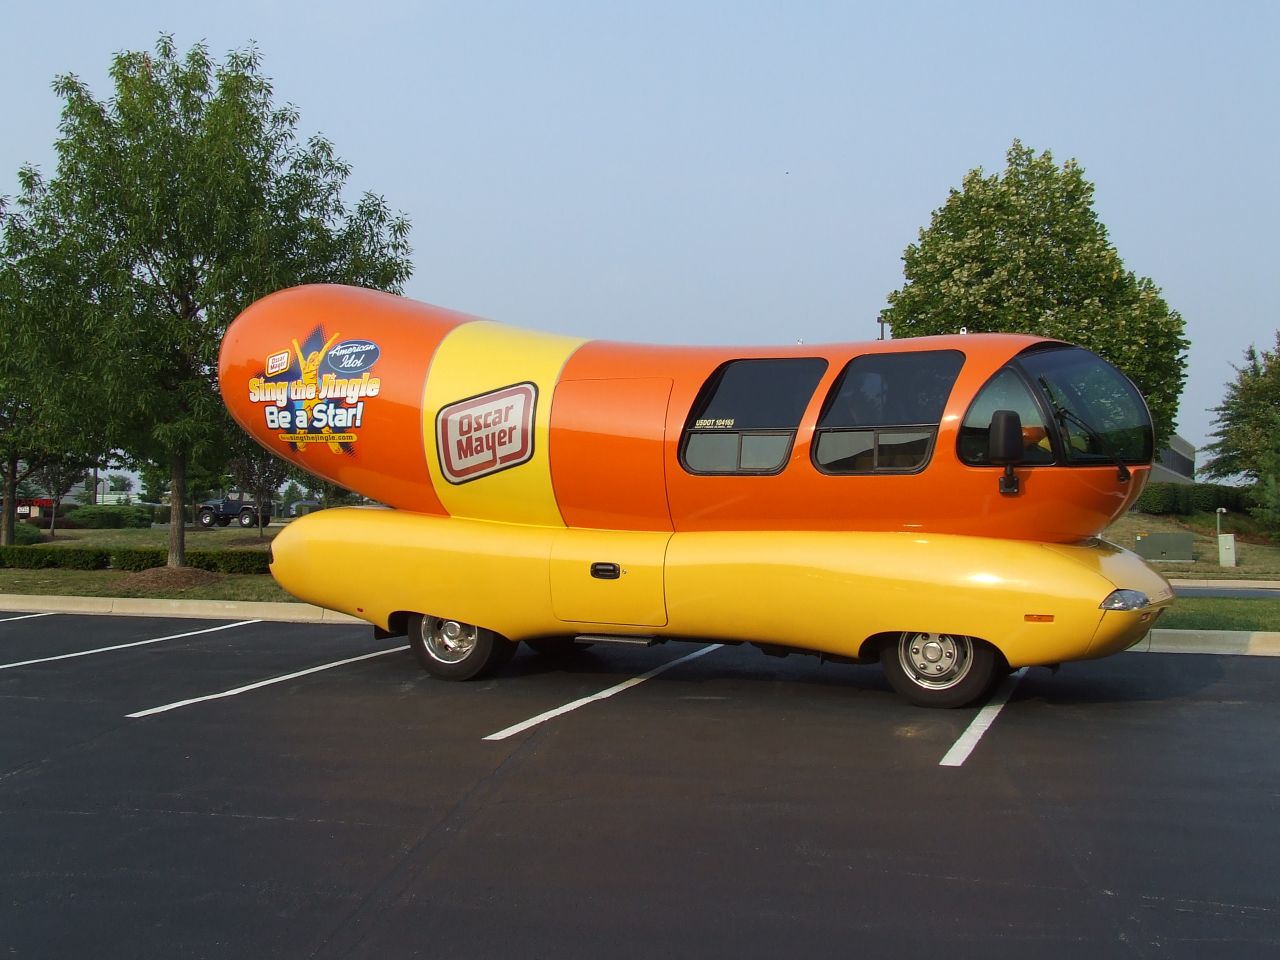 the giant mcdonald's  dog car is parked in a parking lot